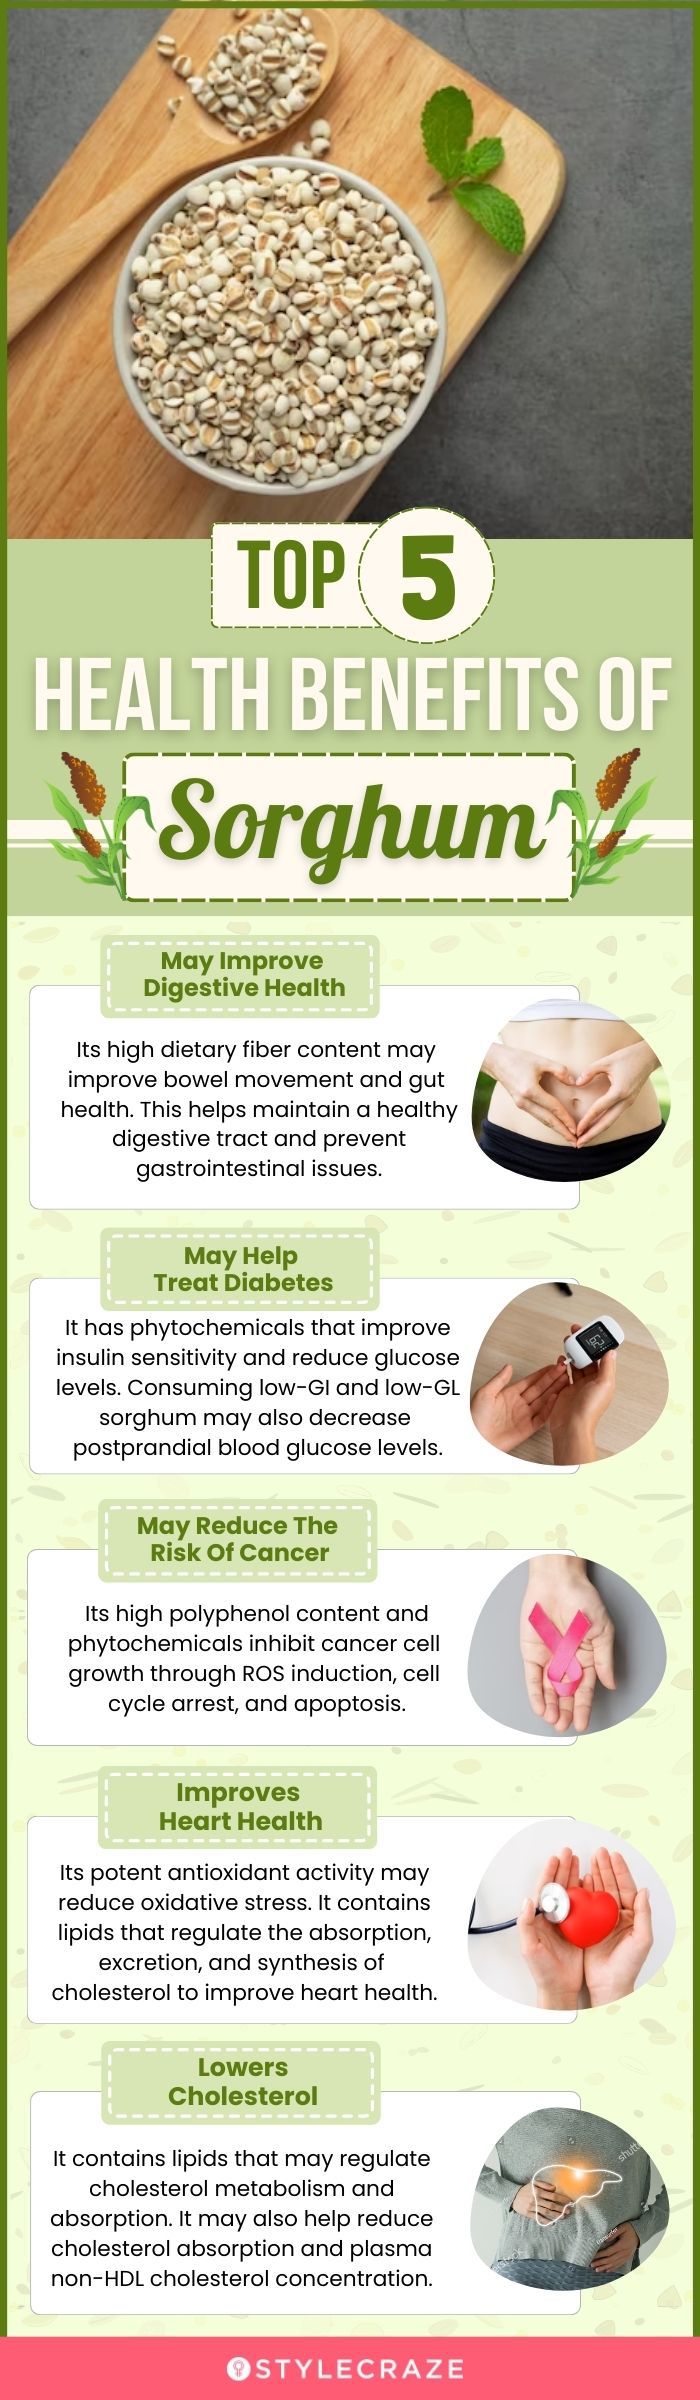 top 5 health benefits of sorghum (infographic)